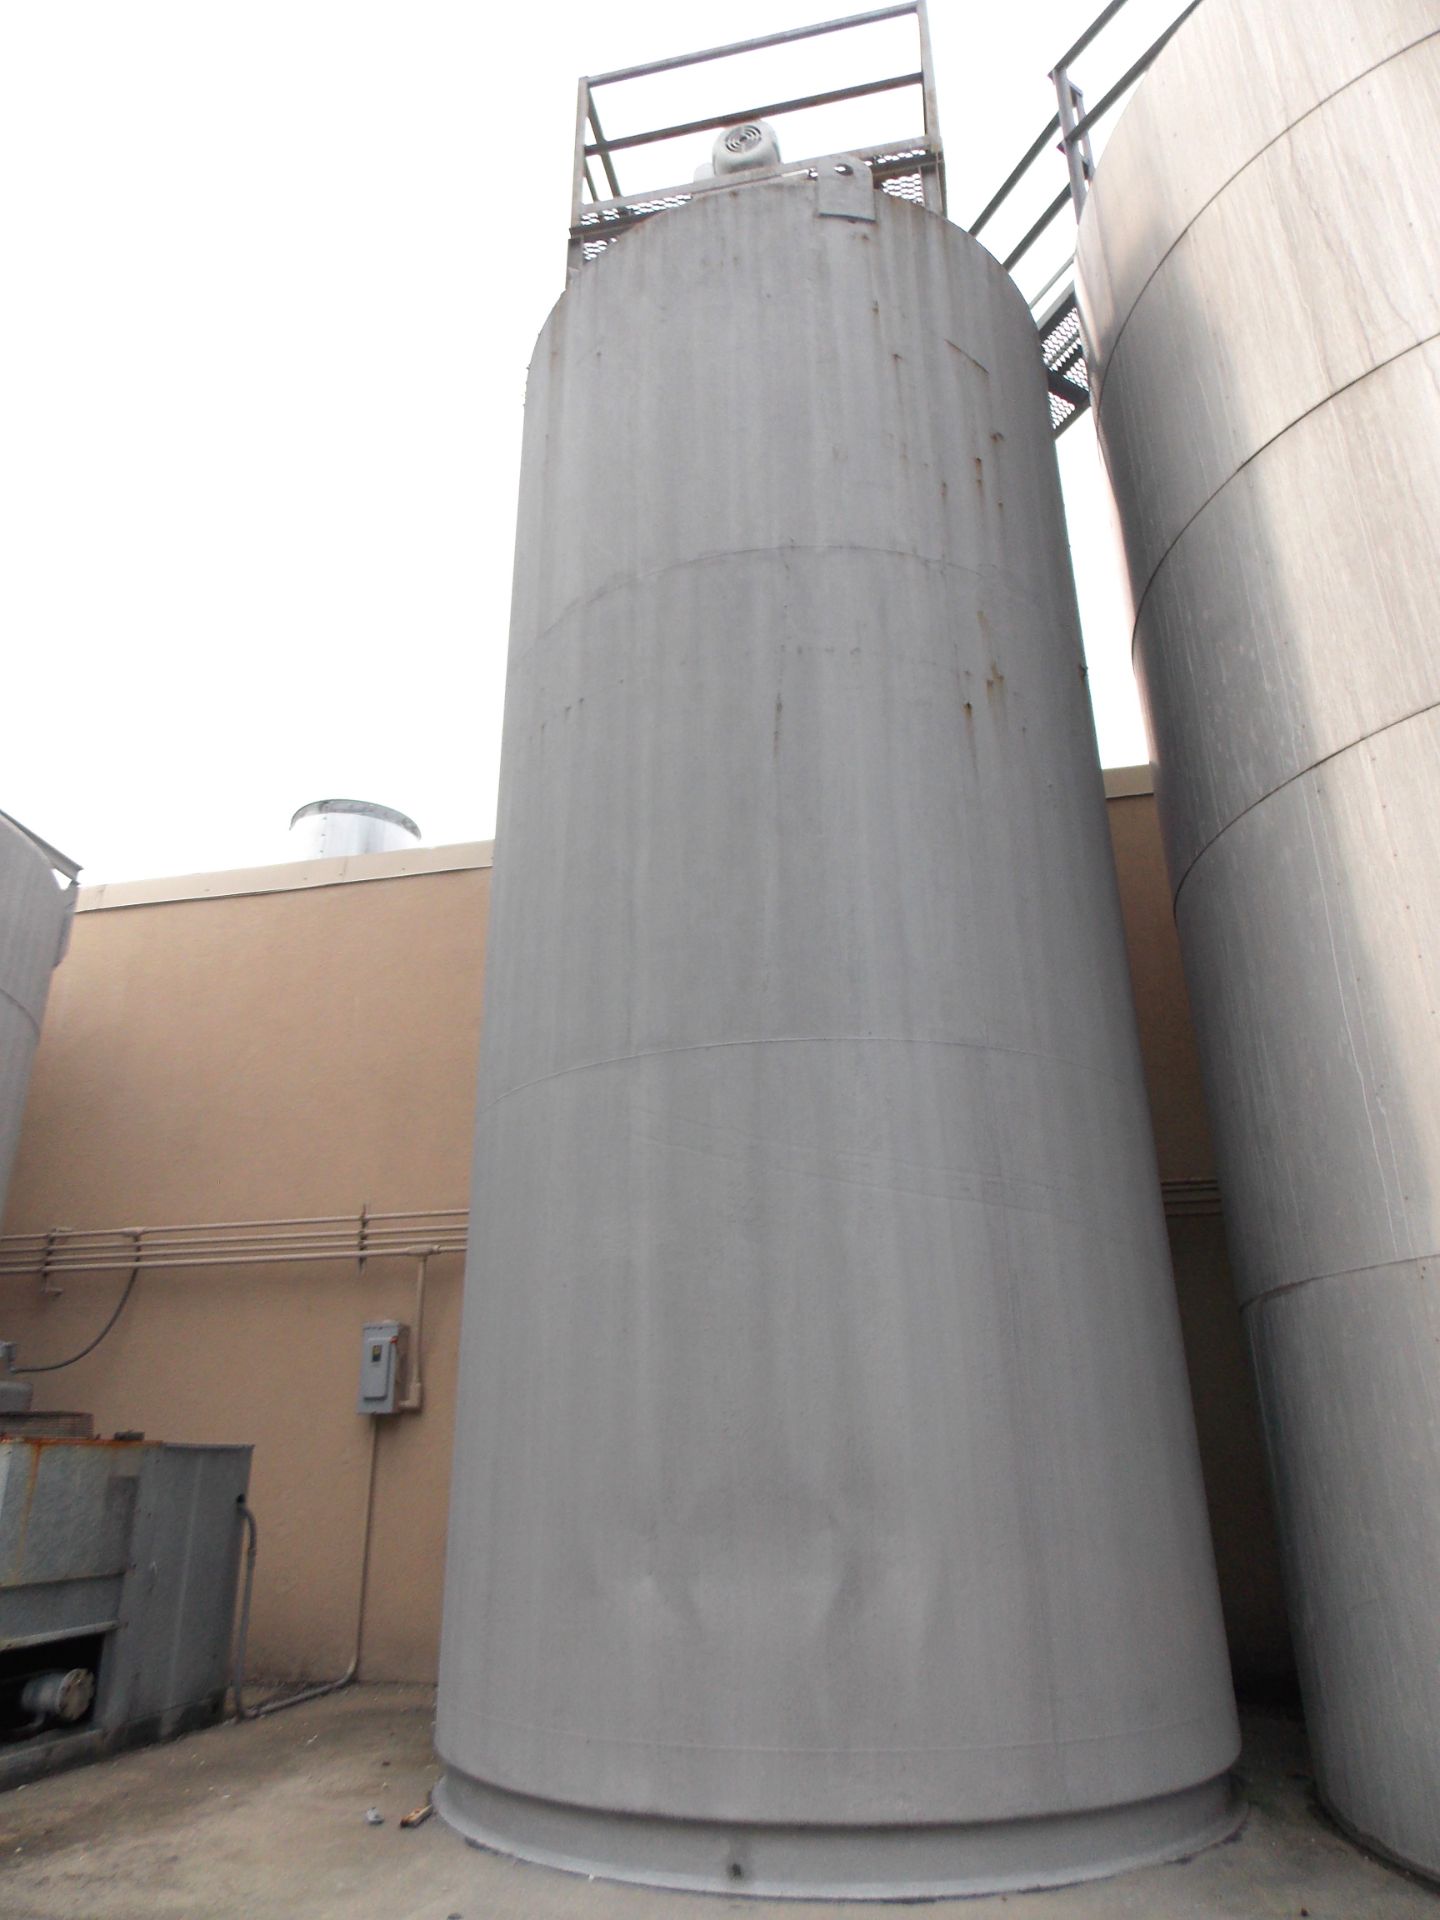 Dairy Craft 6000 Gallon Vertical Silo with Agitator; Serial: 77J3387 Stainless Steel Construction